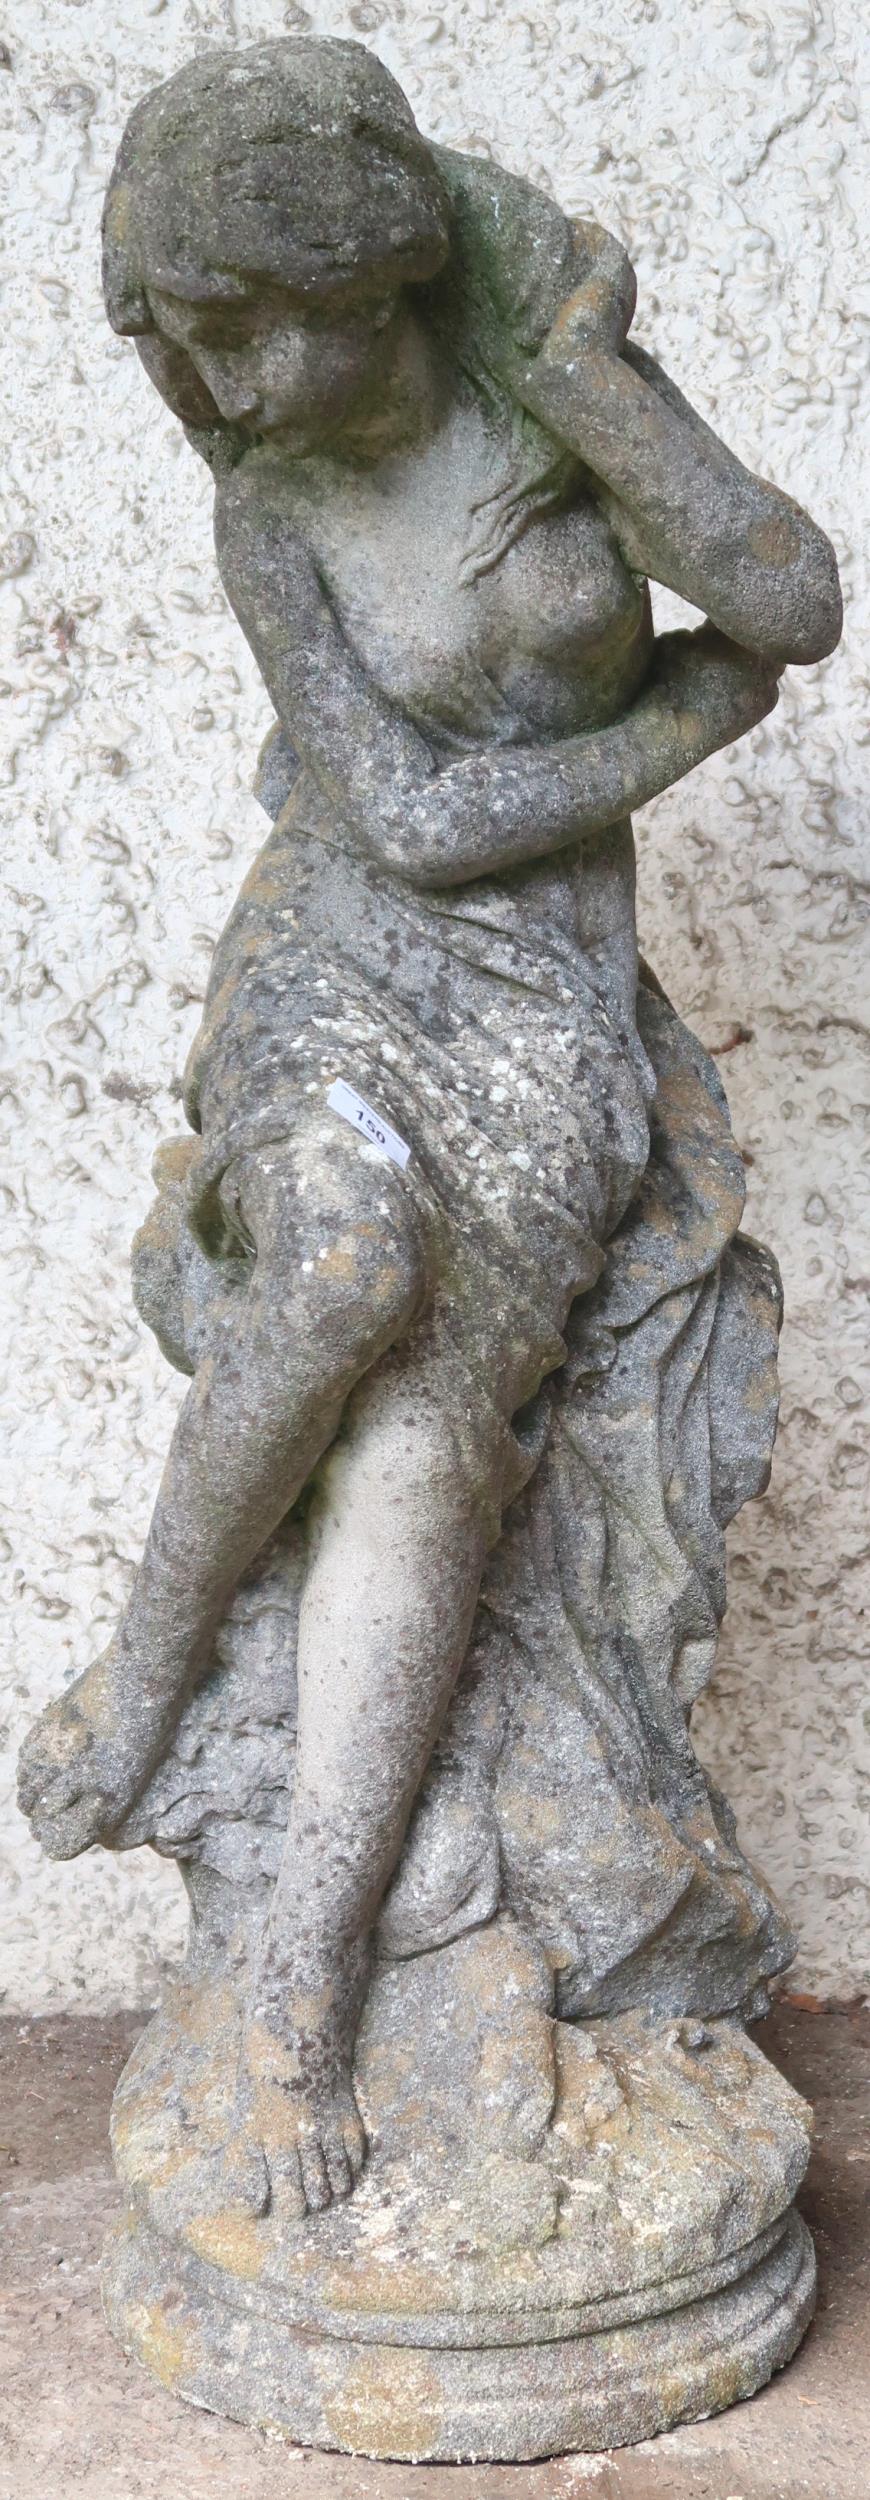 A 20th century reconstituted stone garden statue depicting a nude bather reclining on rocks, 85cm